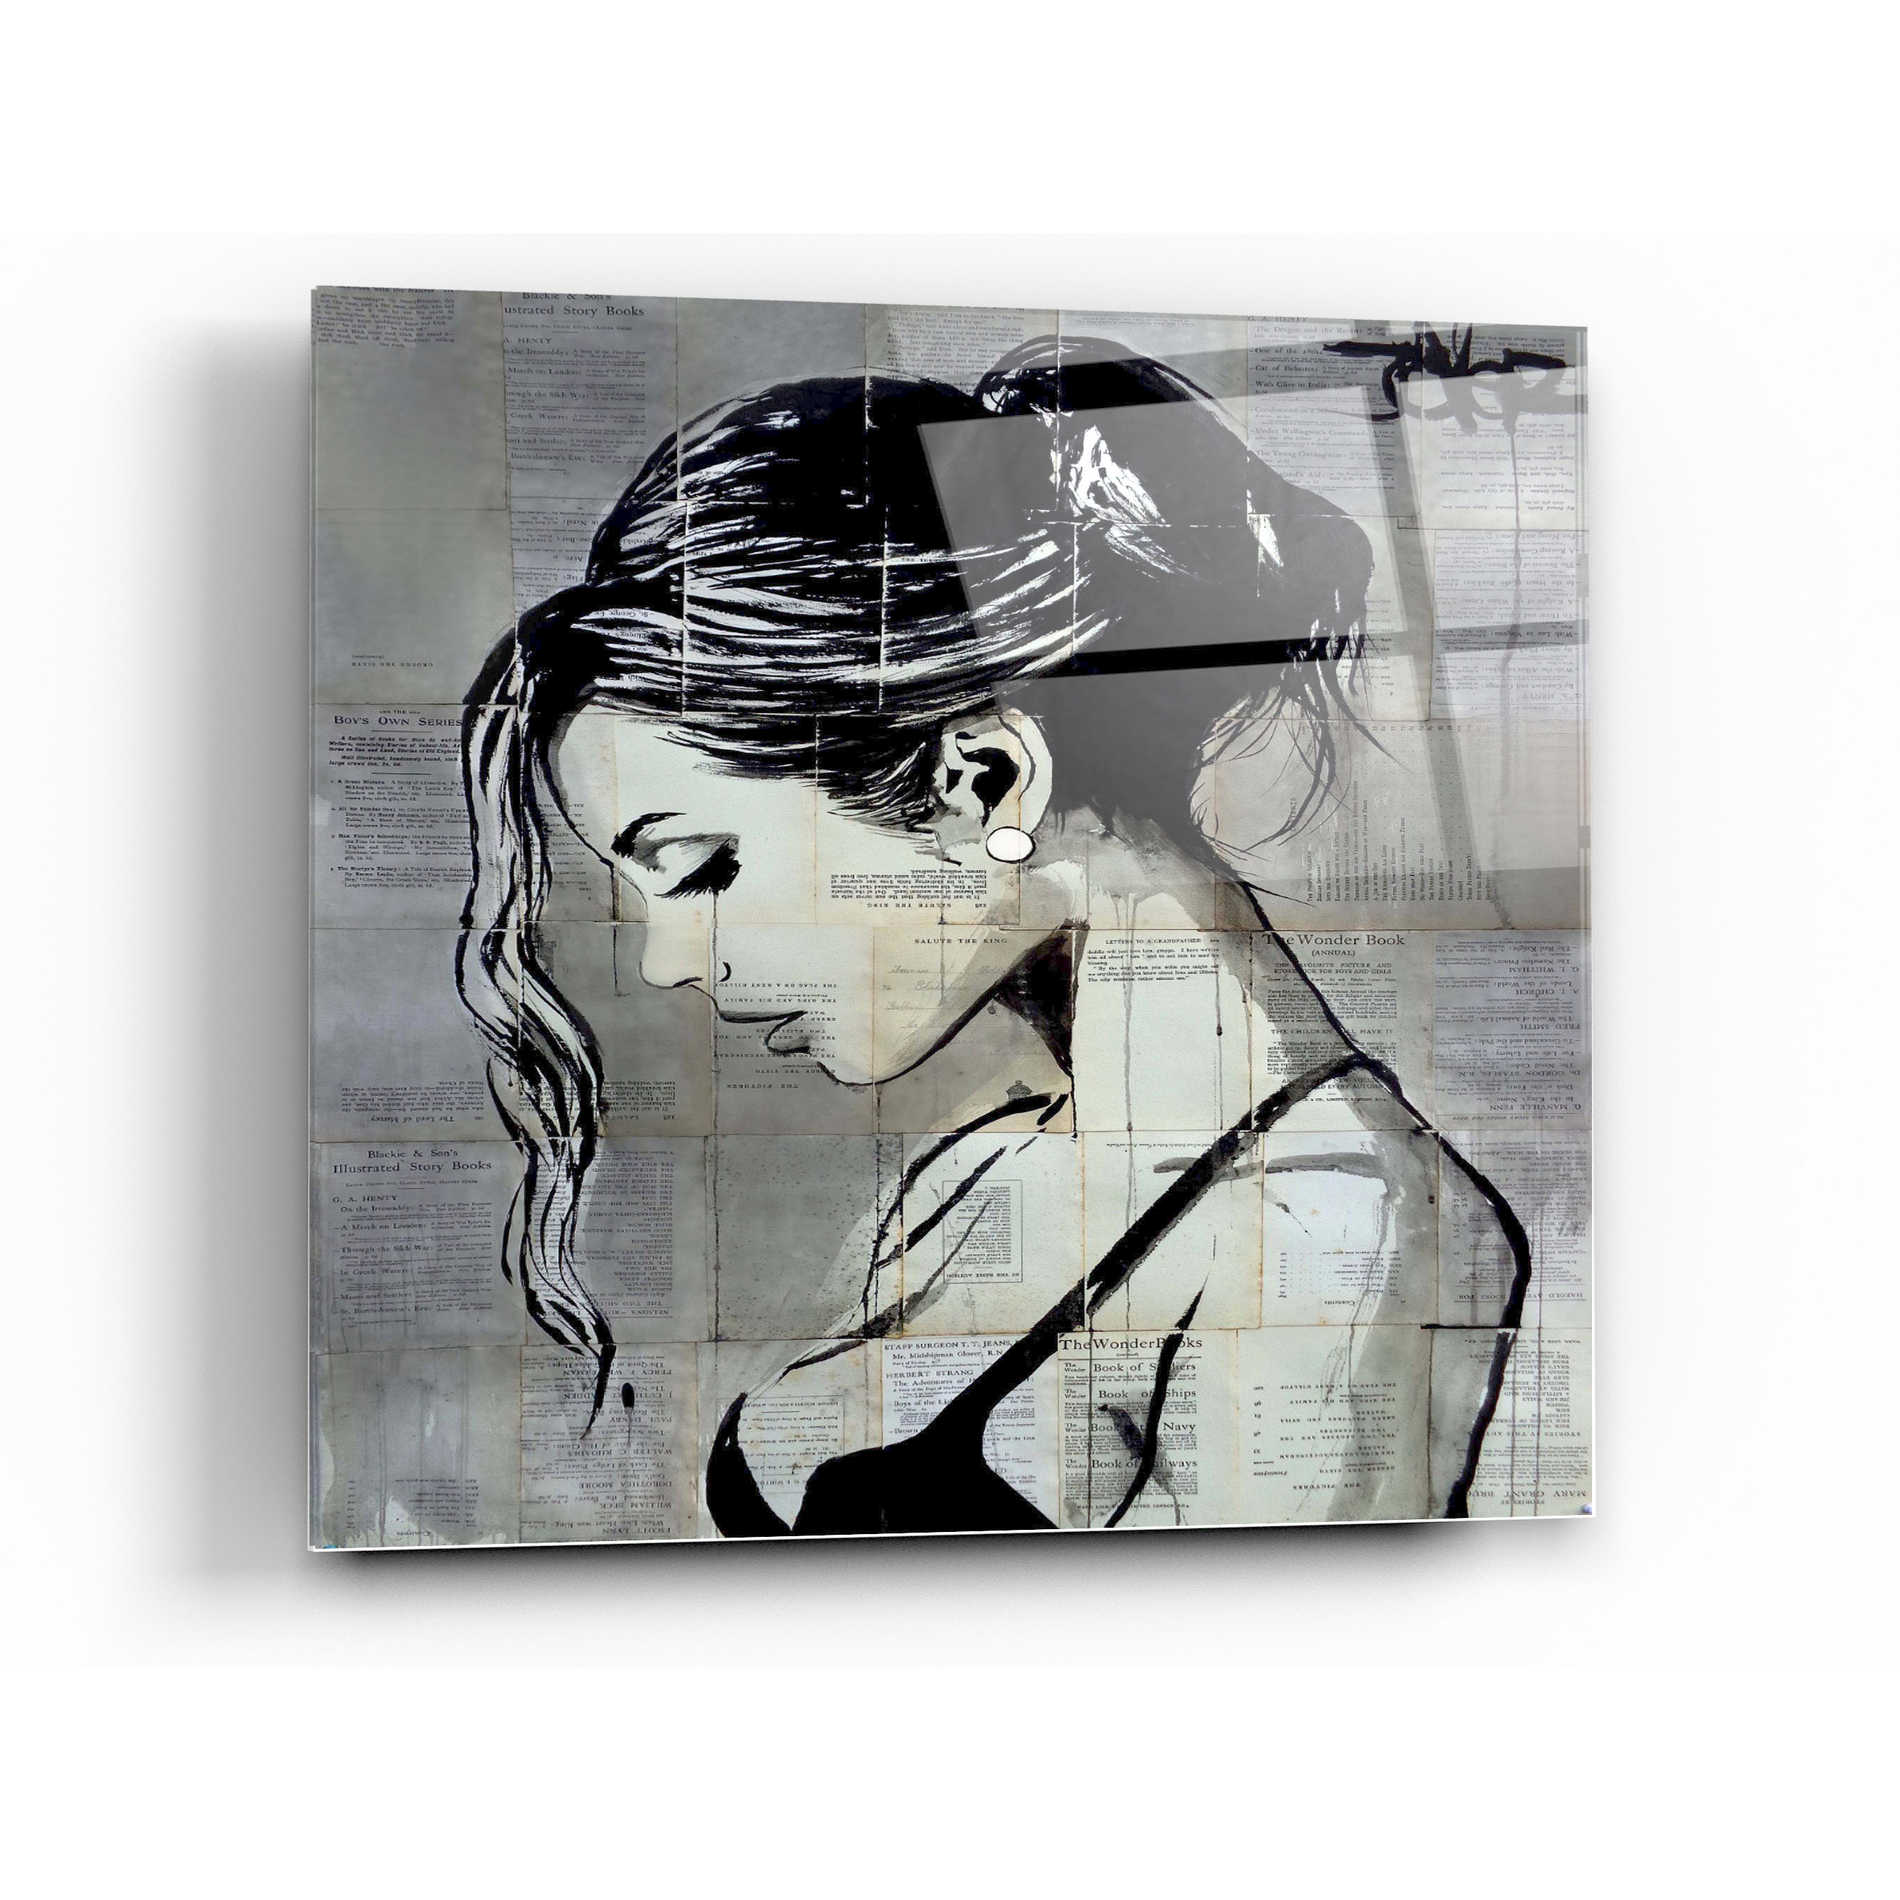 Epic Art 'Being' by Loui Jover, Acrylic Glass Wall Art,12x12